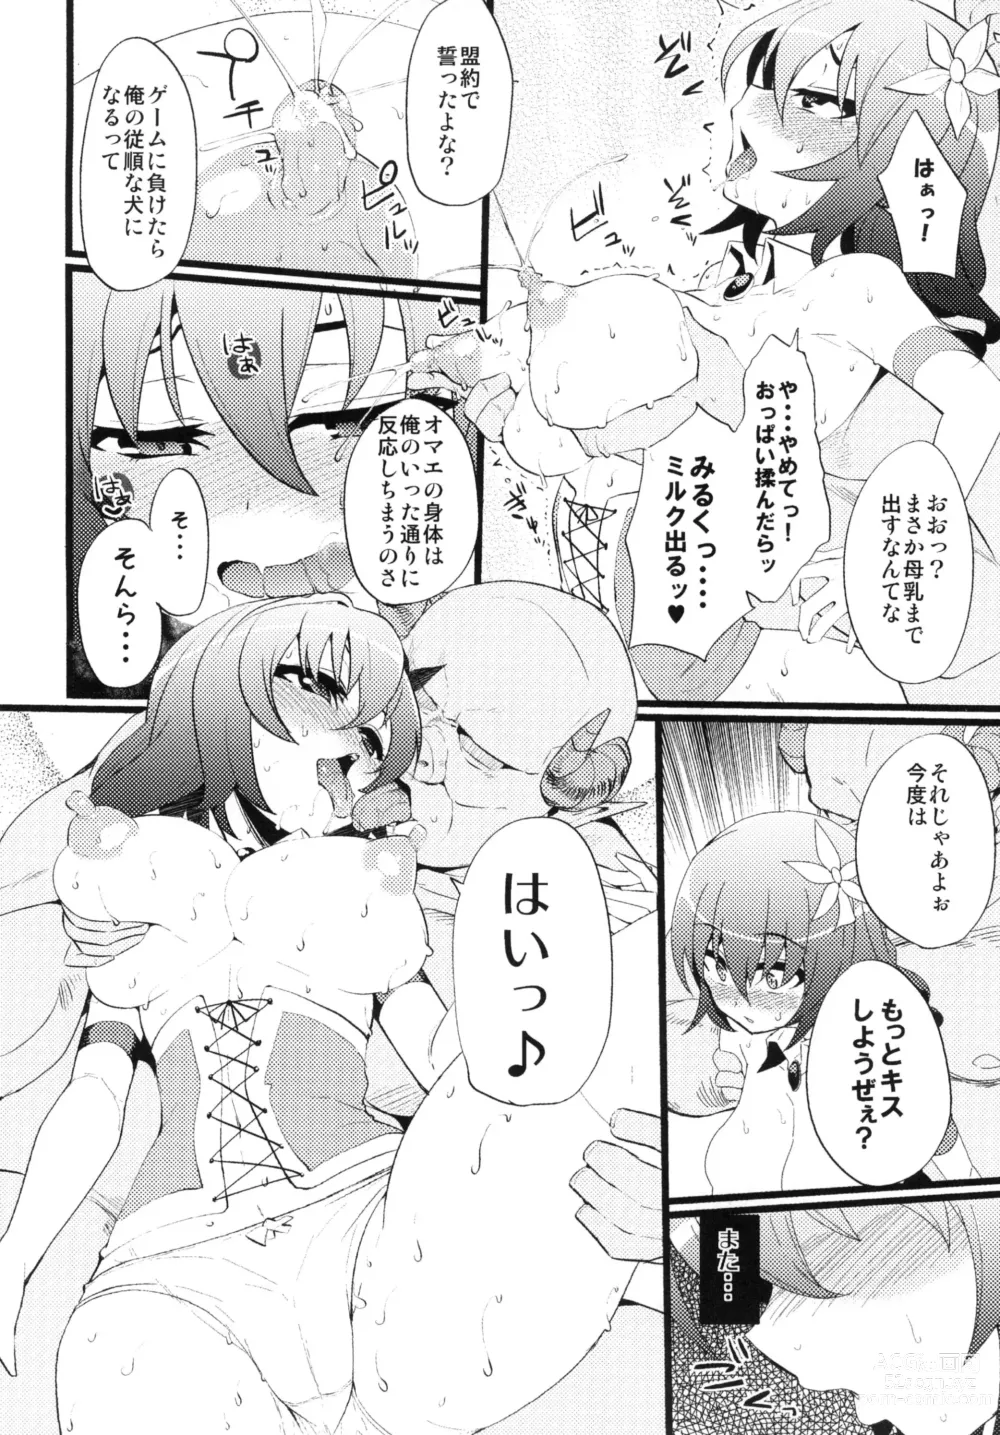 Page 9 of doujinshi Steph Game